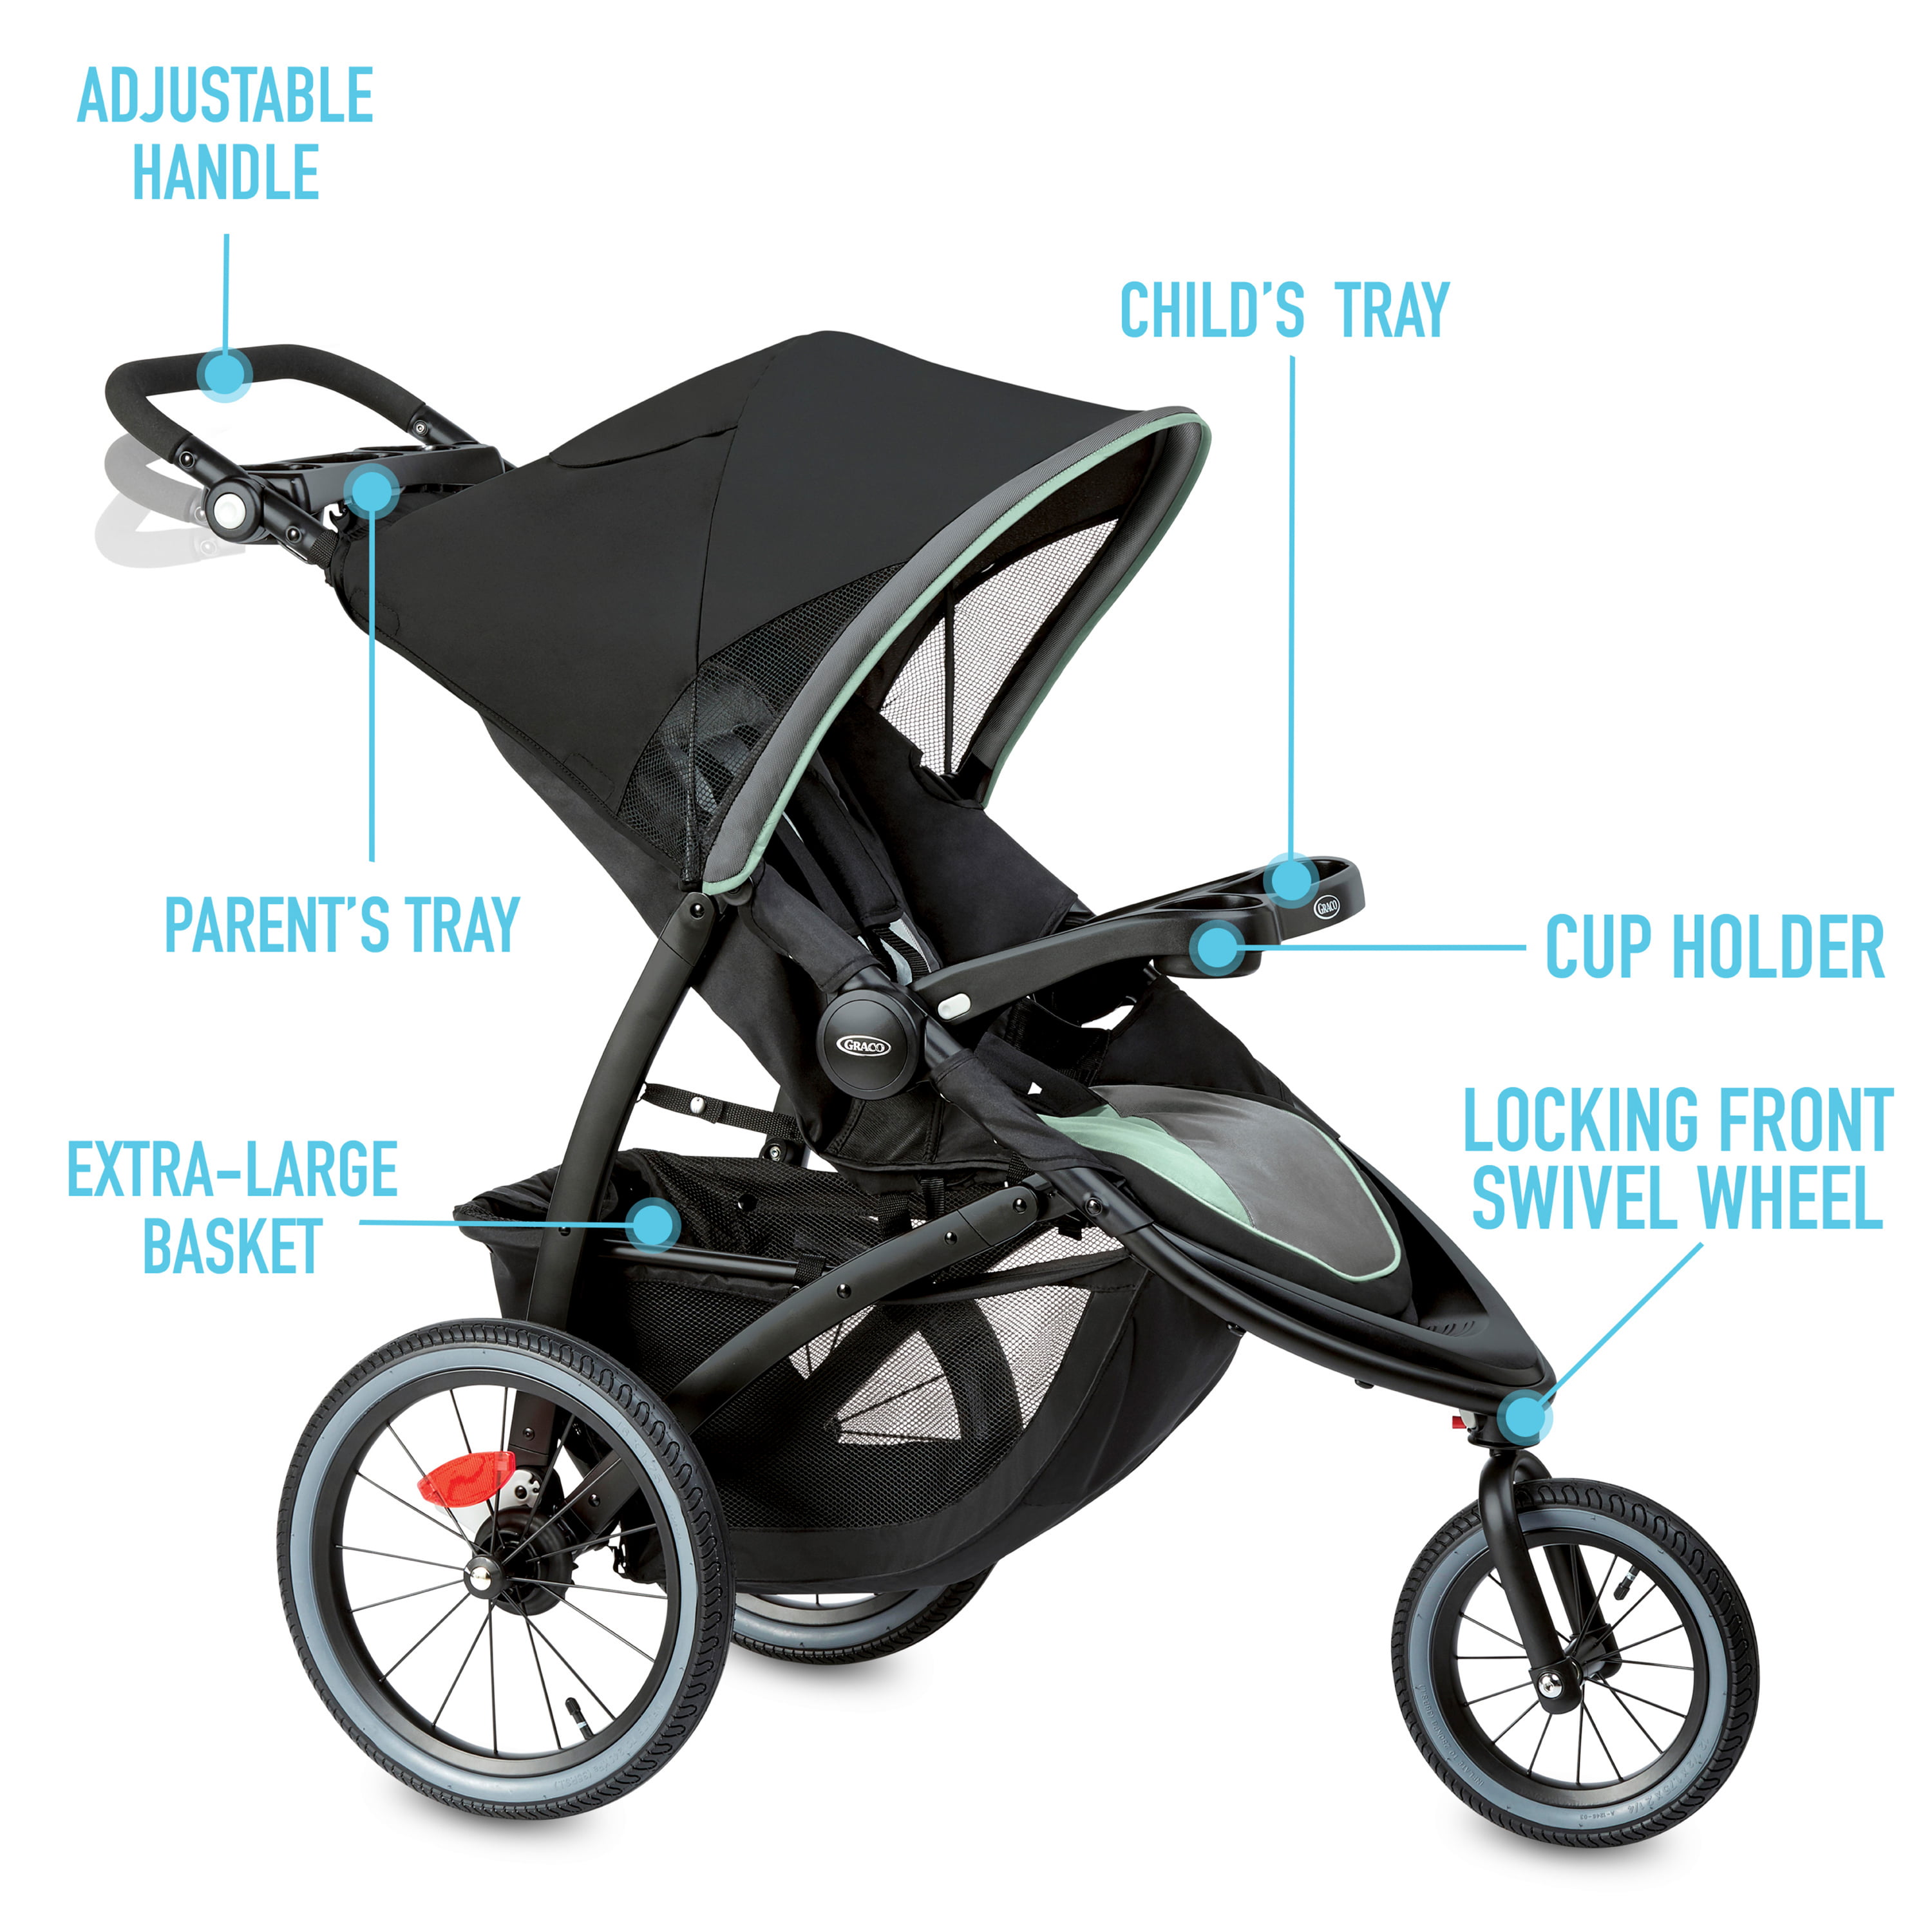 graco fastaction jogger lx drive